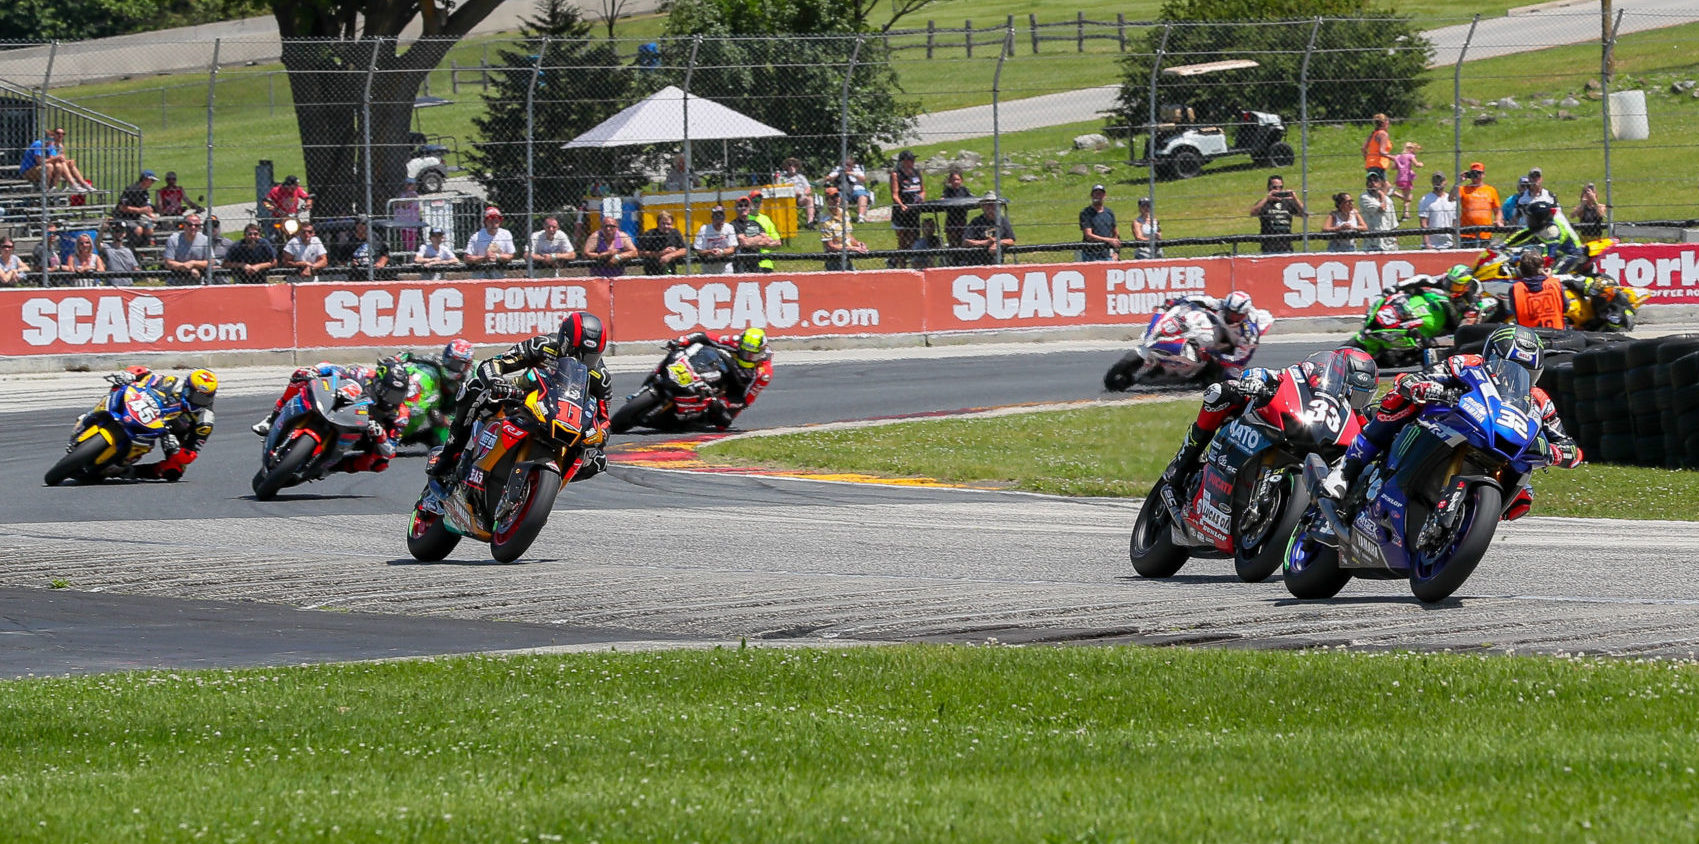 Road America is hosting a full slate of MotoAmerica racing on track and a weekend full of fan activities off track June 11-13. Photo by Brian J. Nelson.